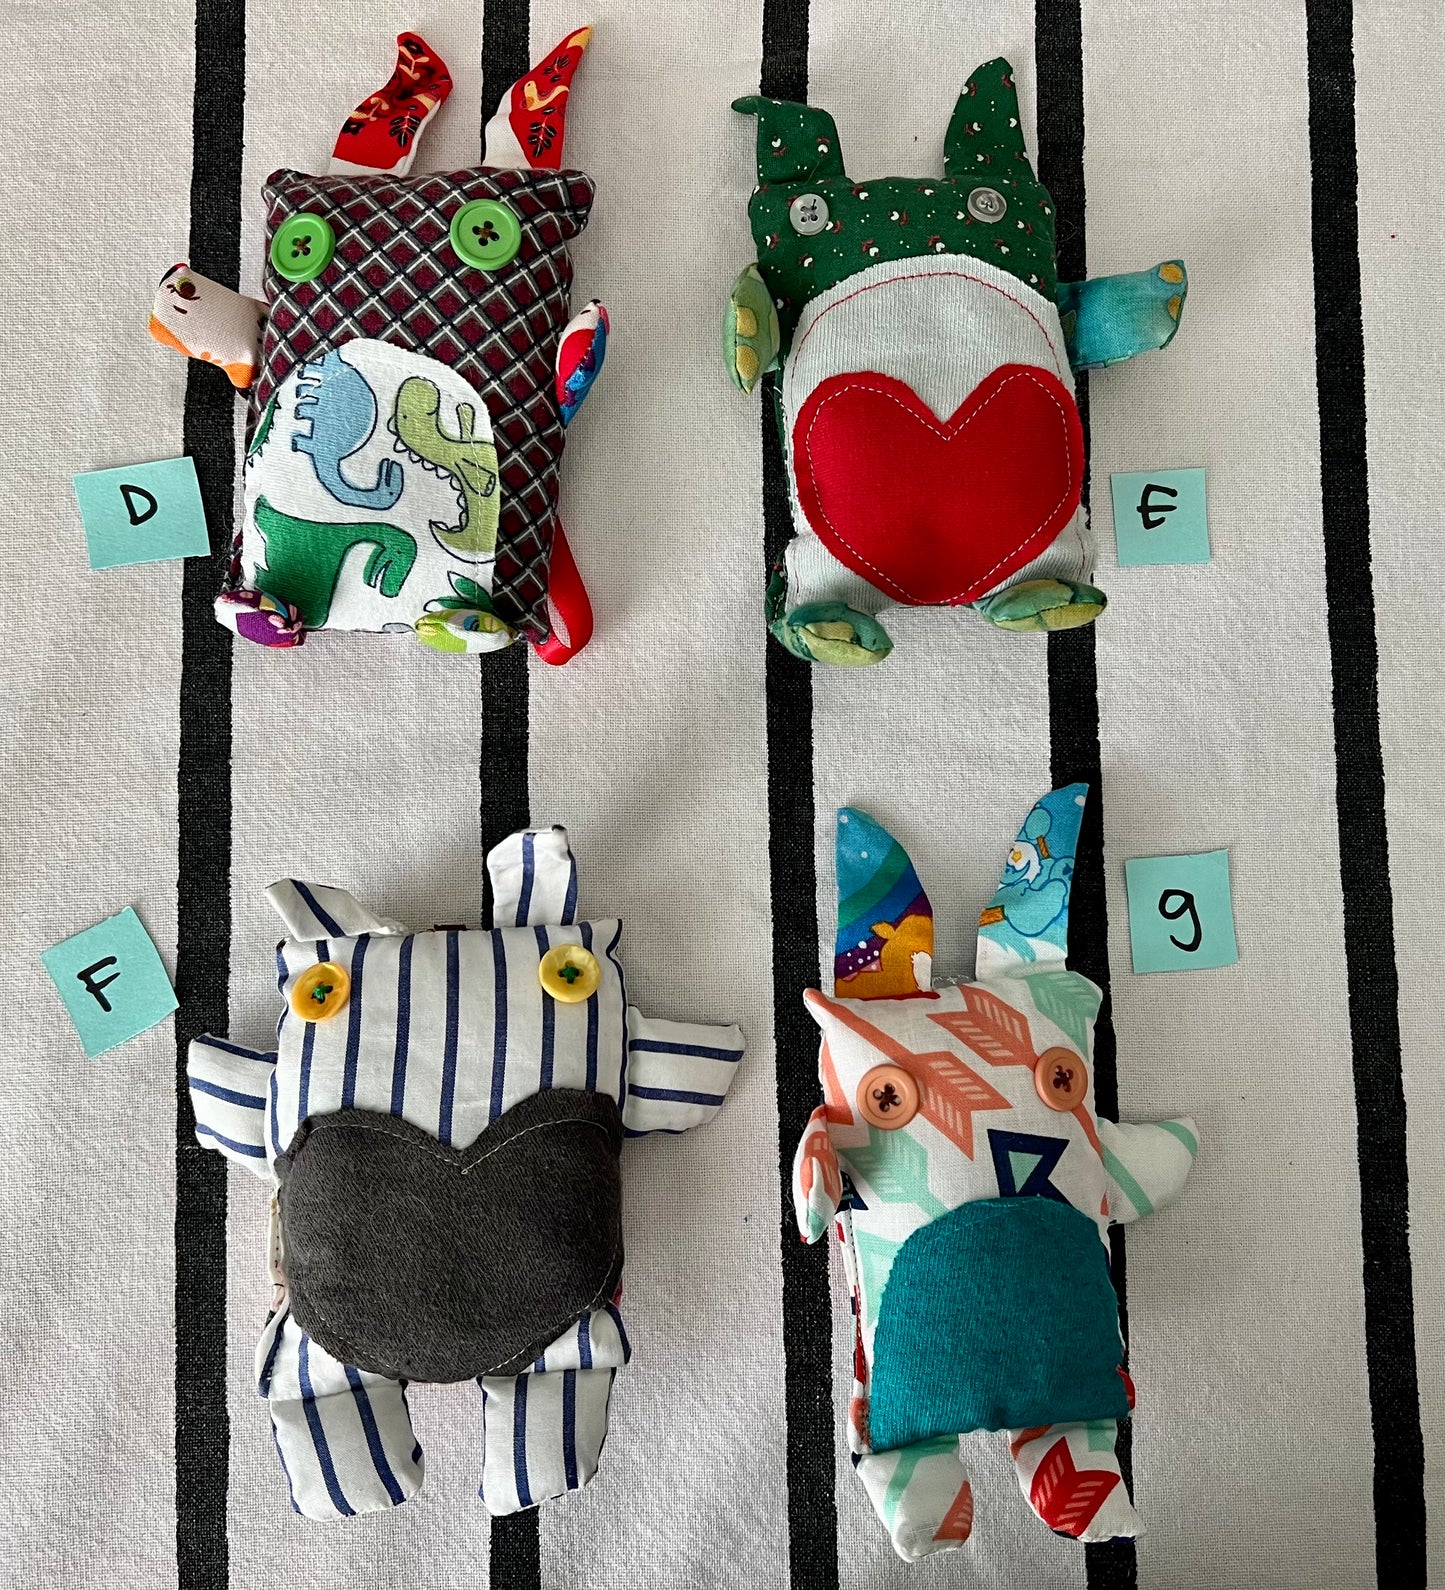 front view of mini animals with letters D E F G next to each one.